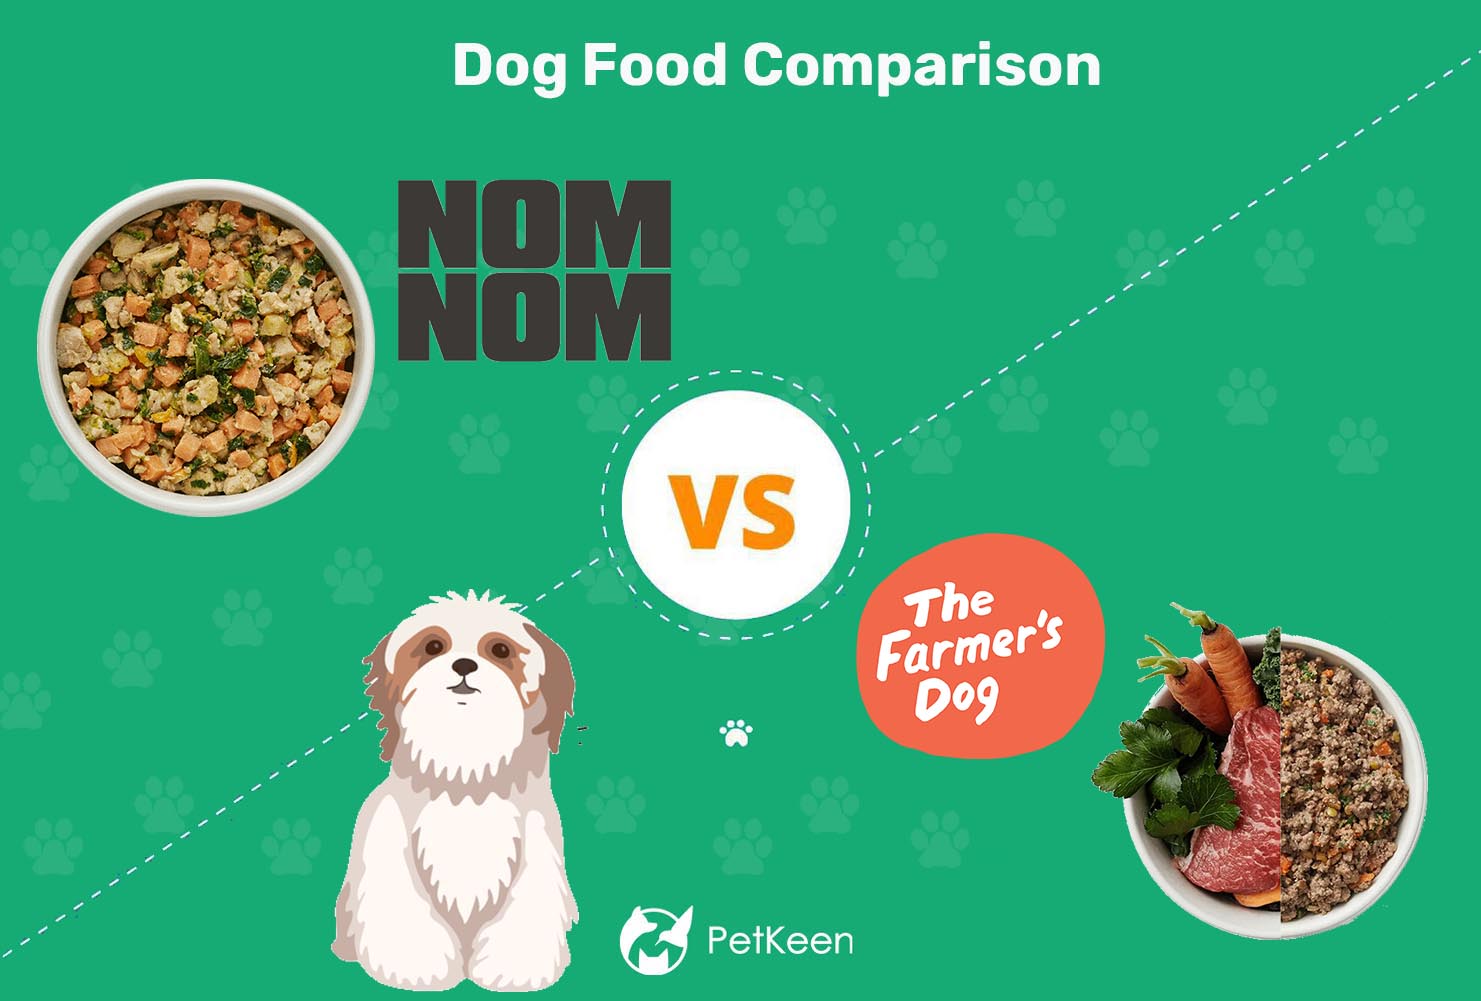 Farmers Dog Vs Nom Nom: Which is the Best Dog Food Service?